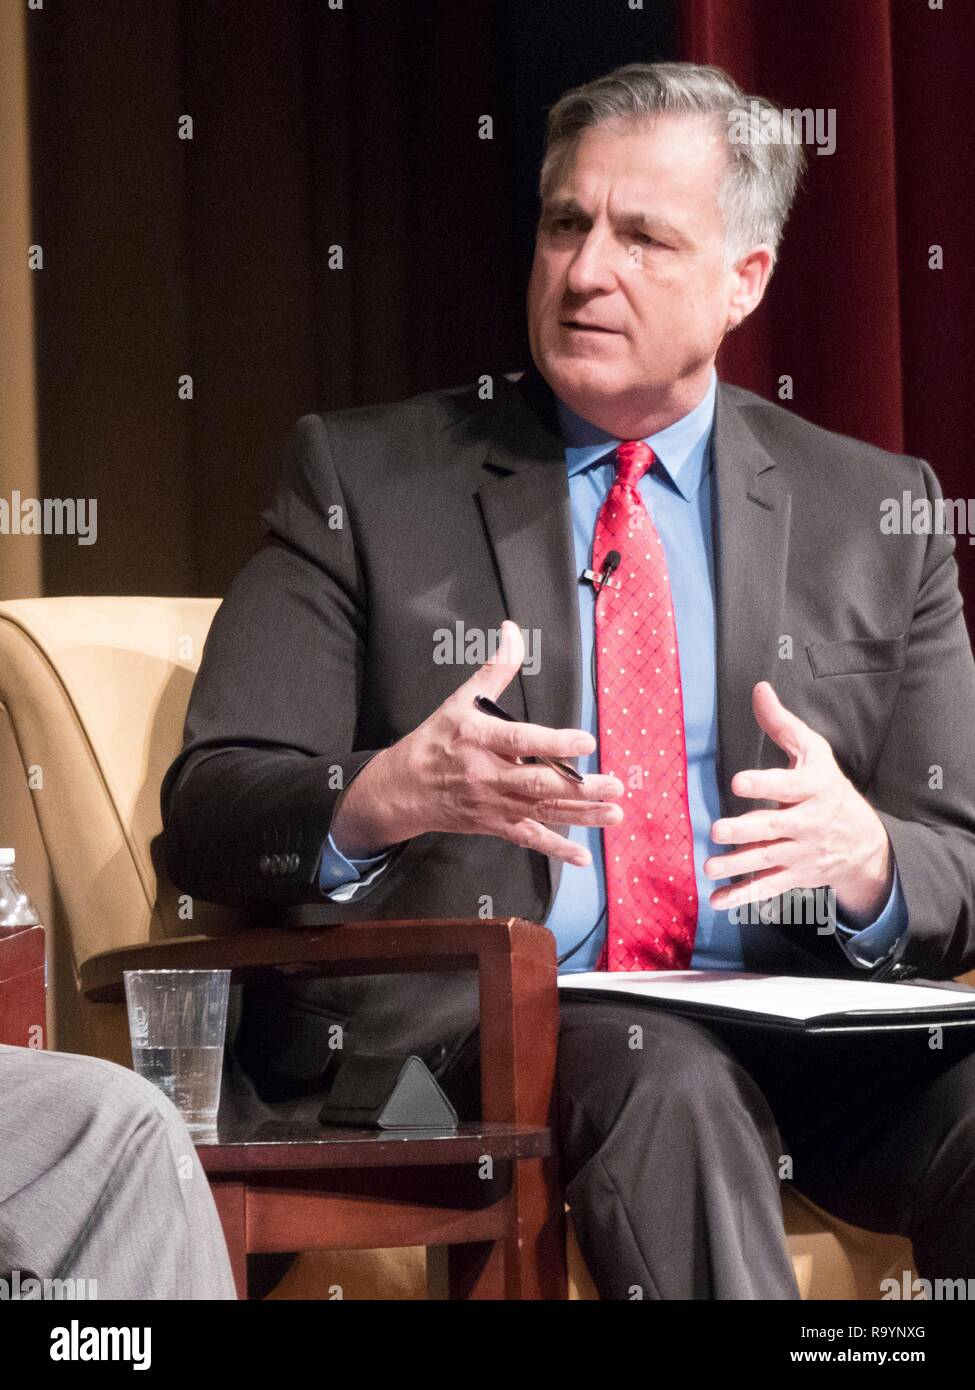 John Milewski, Managing Editor at the Wilson Center during a discussion on Vietnam at the National Archives November 14, 2018 in Washington, D.C. Stock Photo